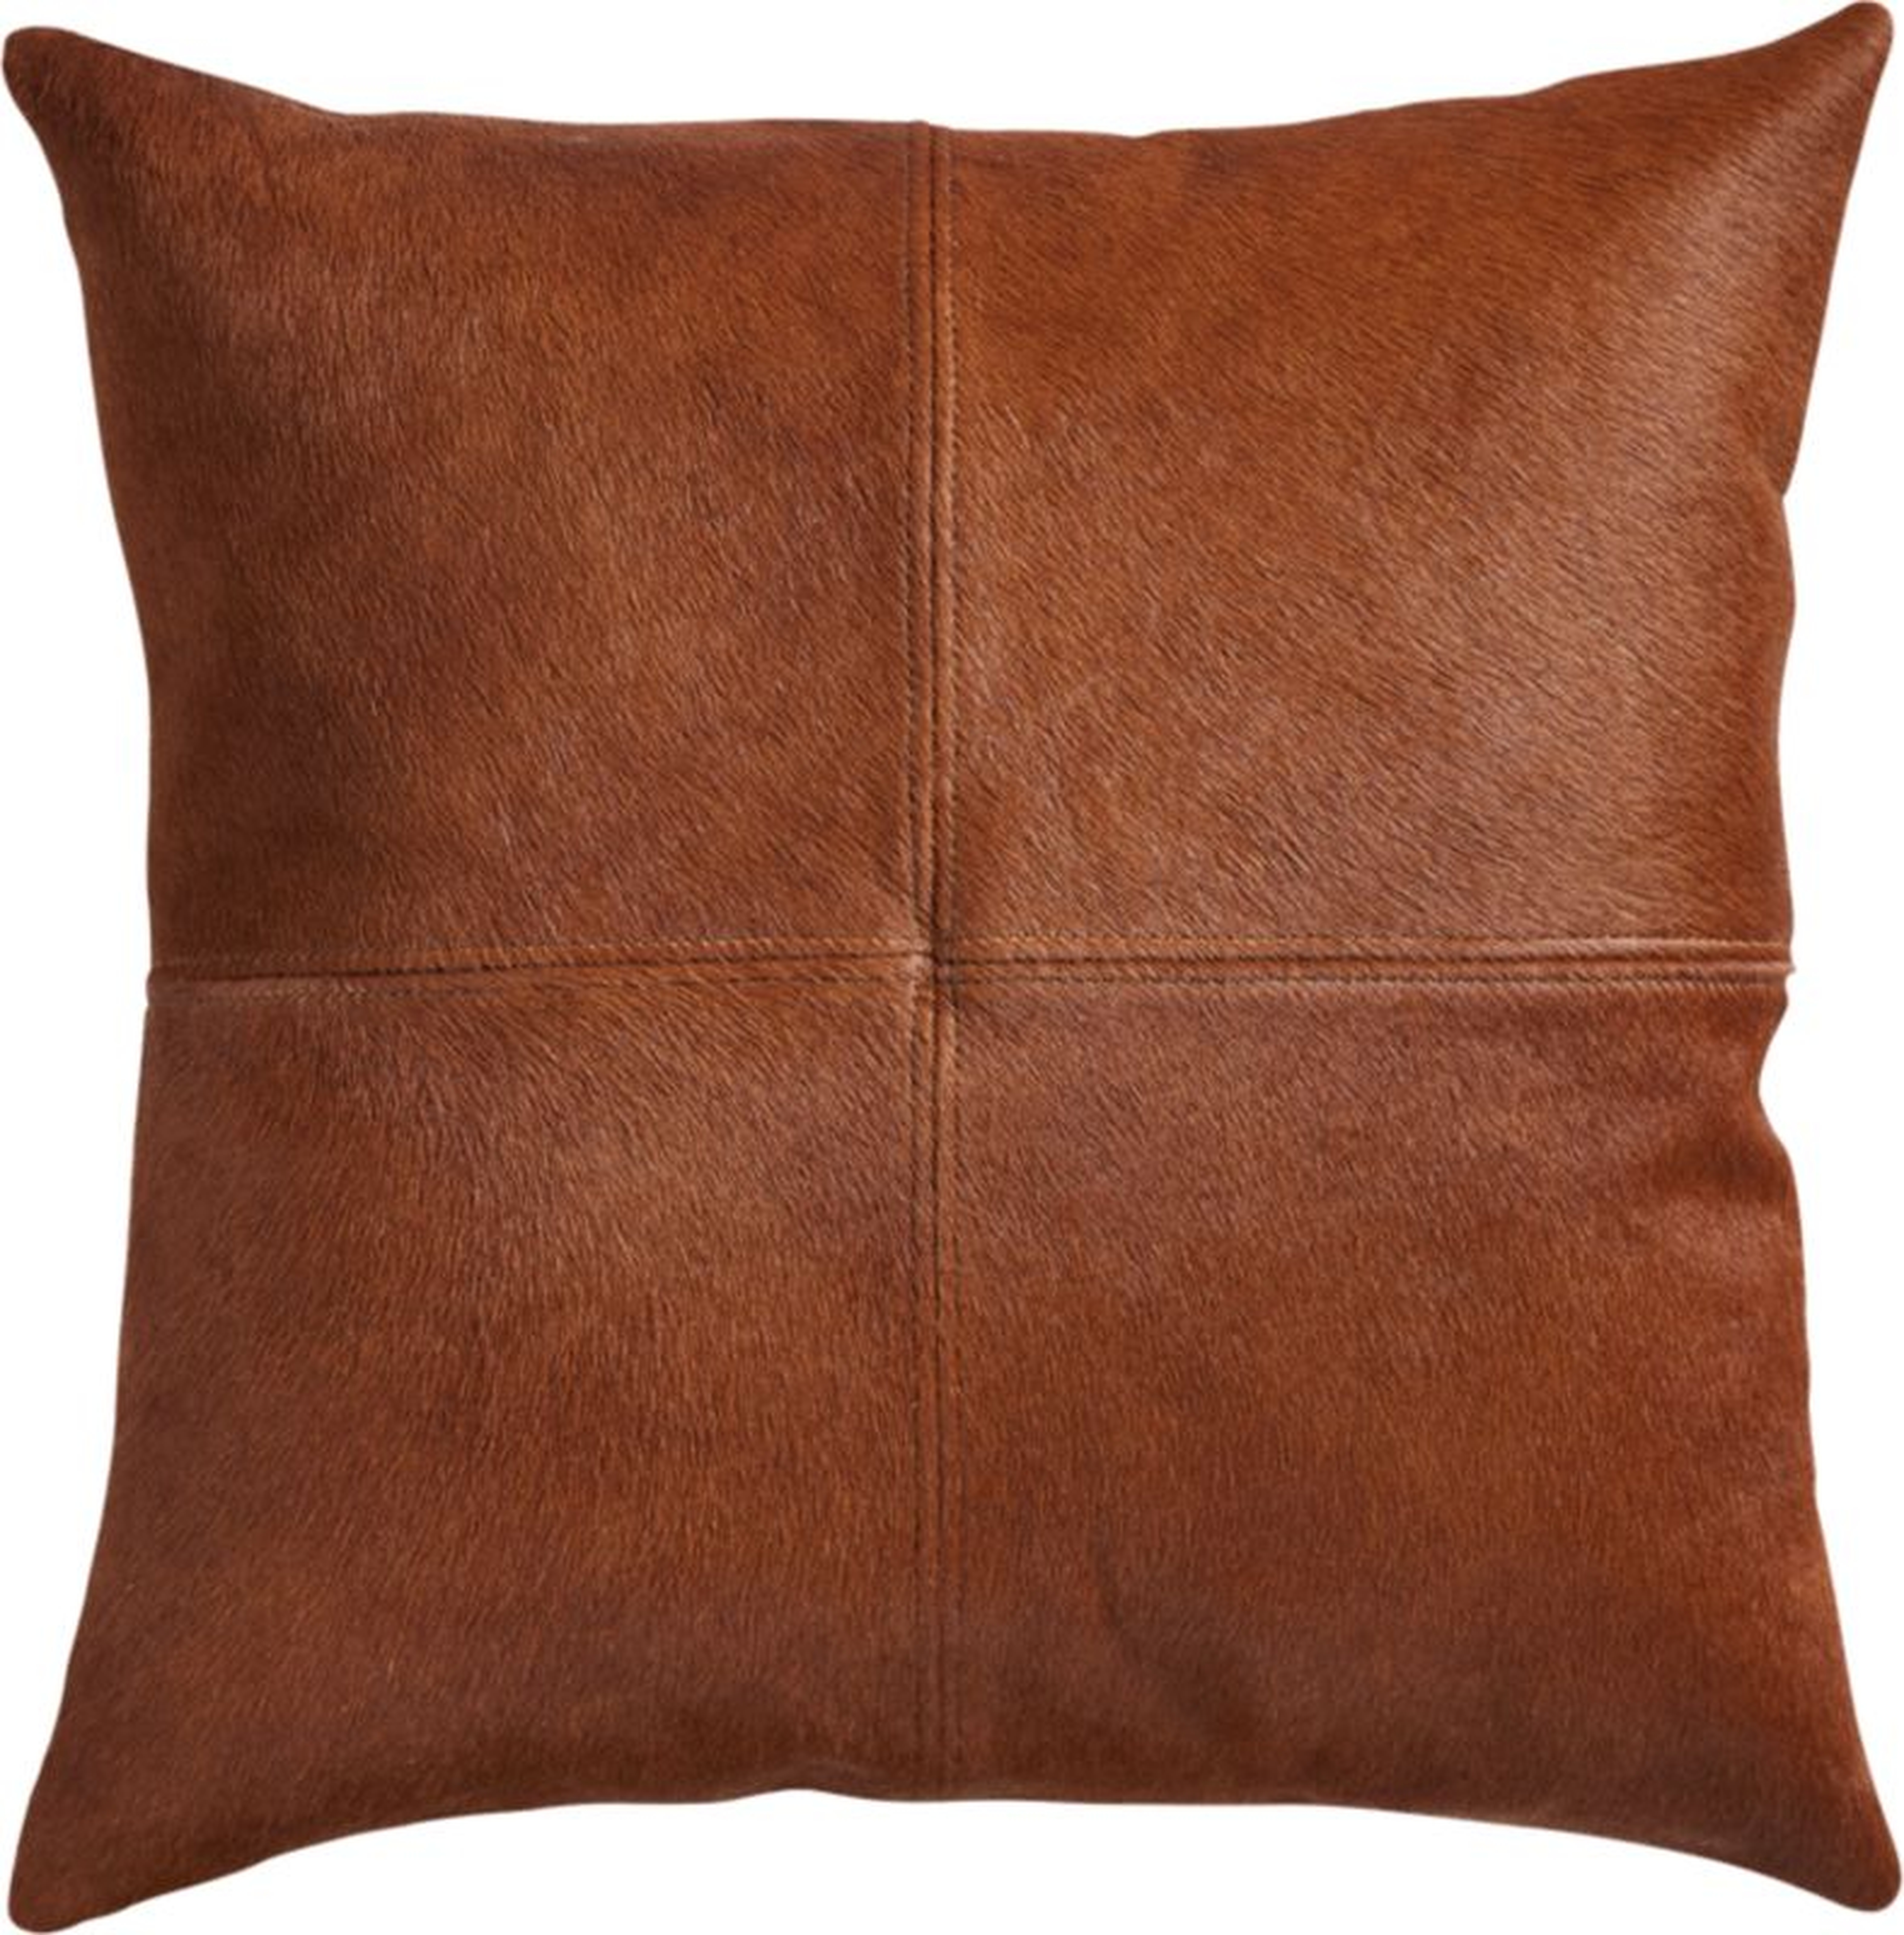 18" Light Brown Cowhide Pillow with Down-Alternative Insert - CB2